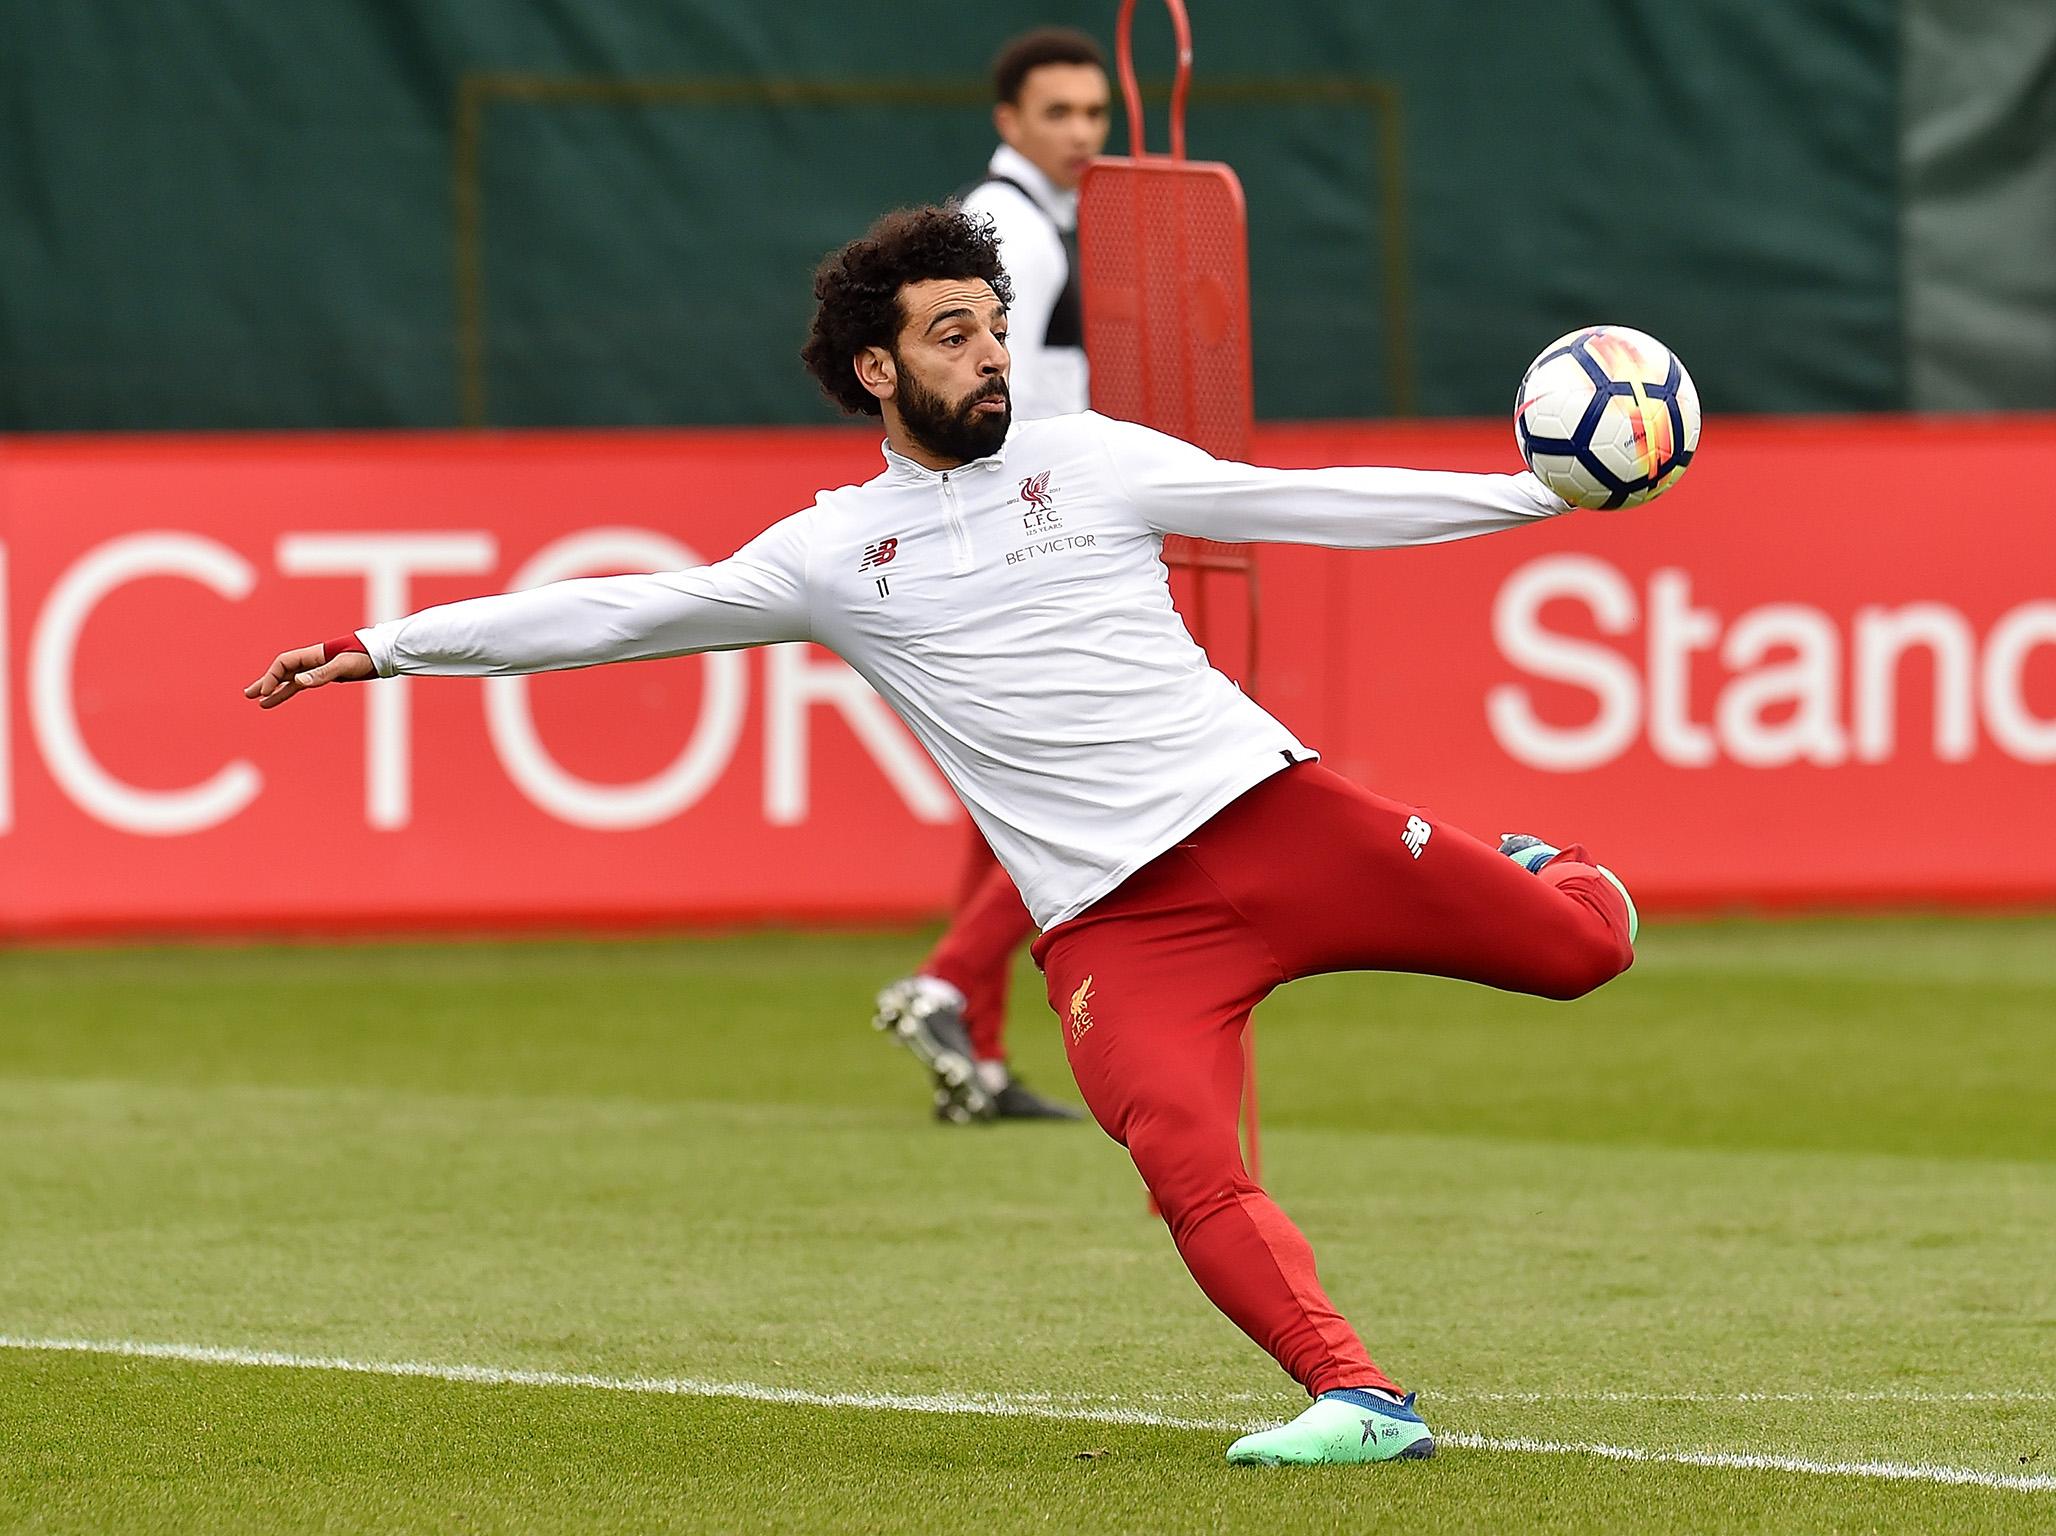 Mohamed Salah is one of the best in the world, says Roy Hodgson ahead of Liverpool's visit to Crystal Palace Independent | The Independent